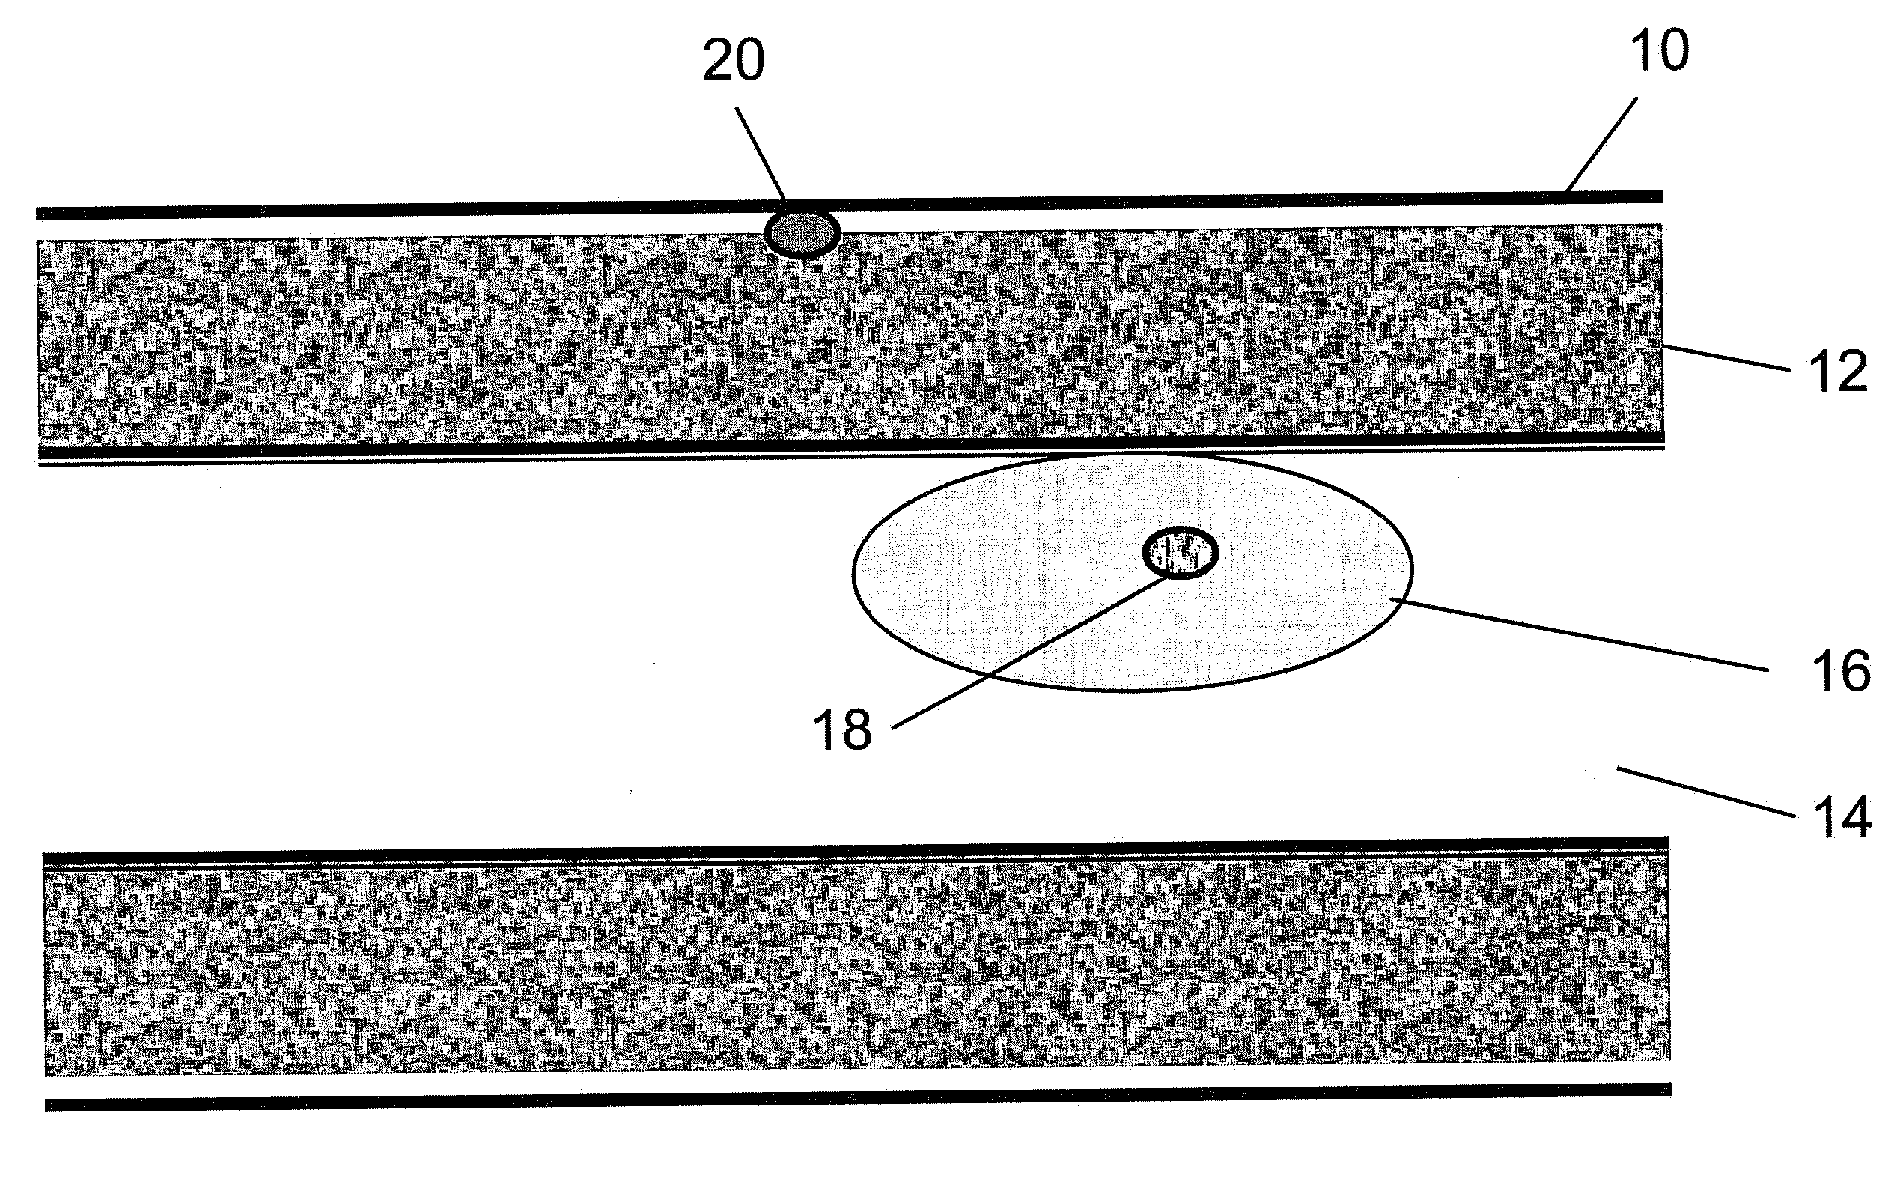 System for implanting, activating, and operating an implantable battery